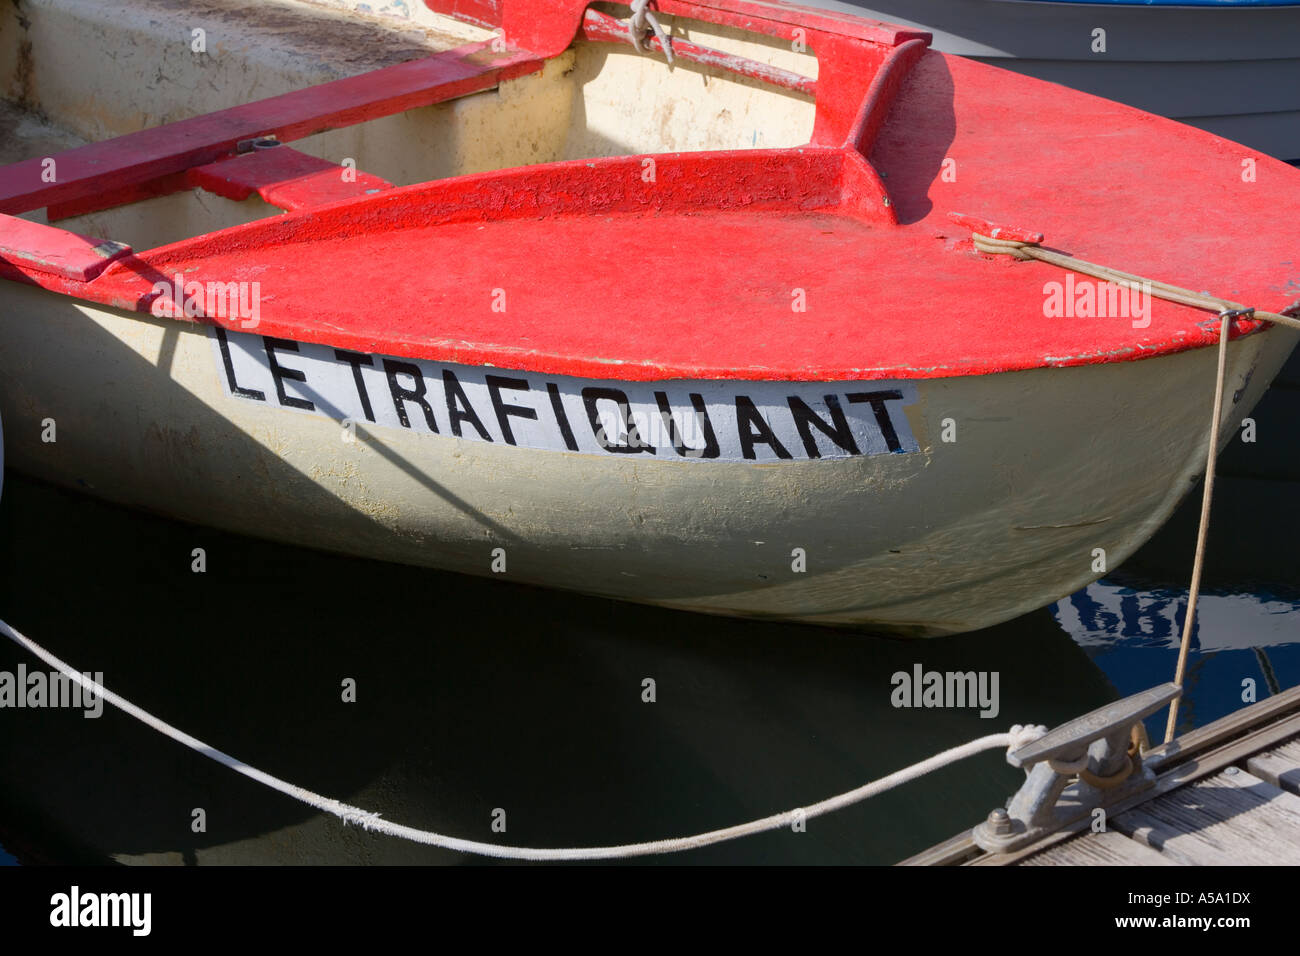 'Le Trafiquant' Red and White boat moored in marina in Réunion Stock Photo